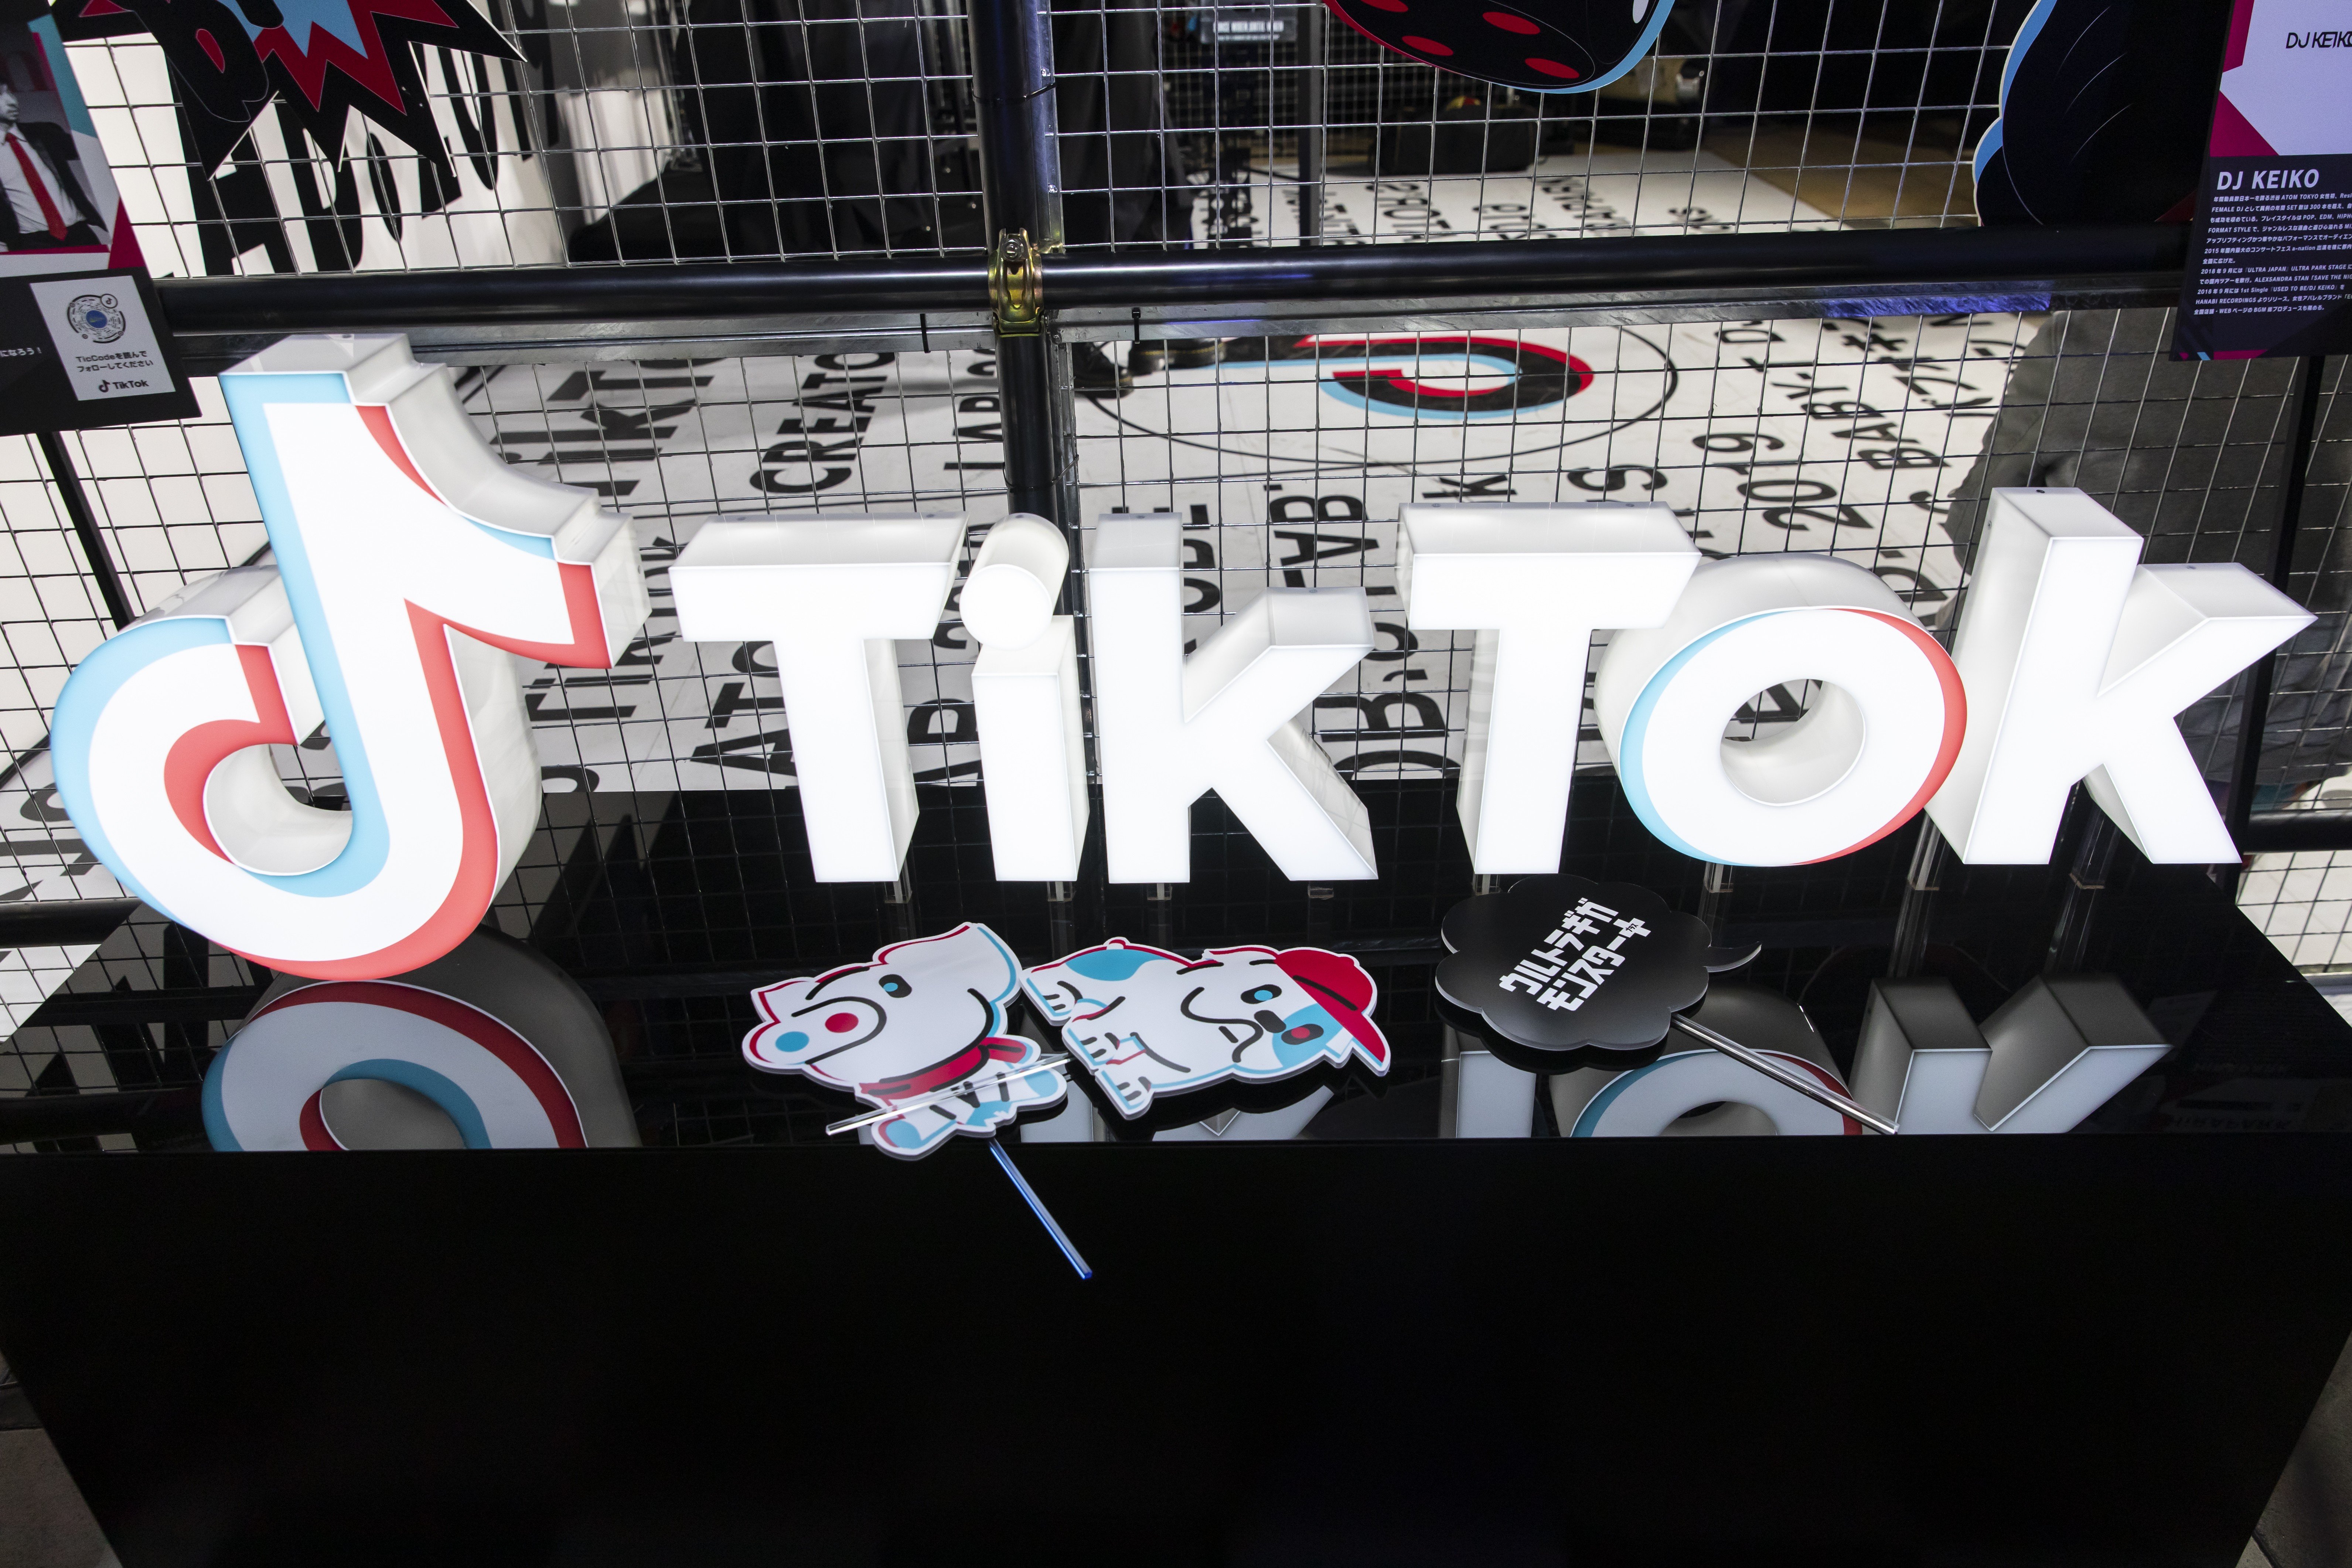 TikTok has become one of the most heavily downloaded apps worldwide since it was launched in 2016. Photo: Bloomberg